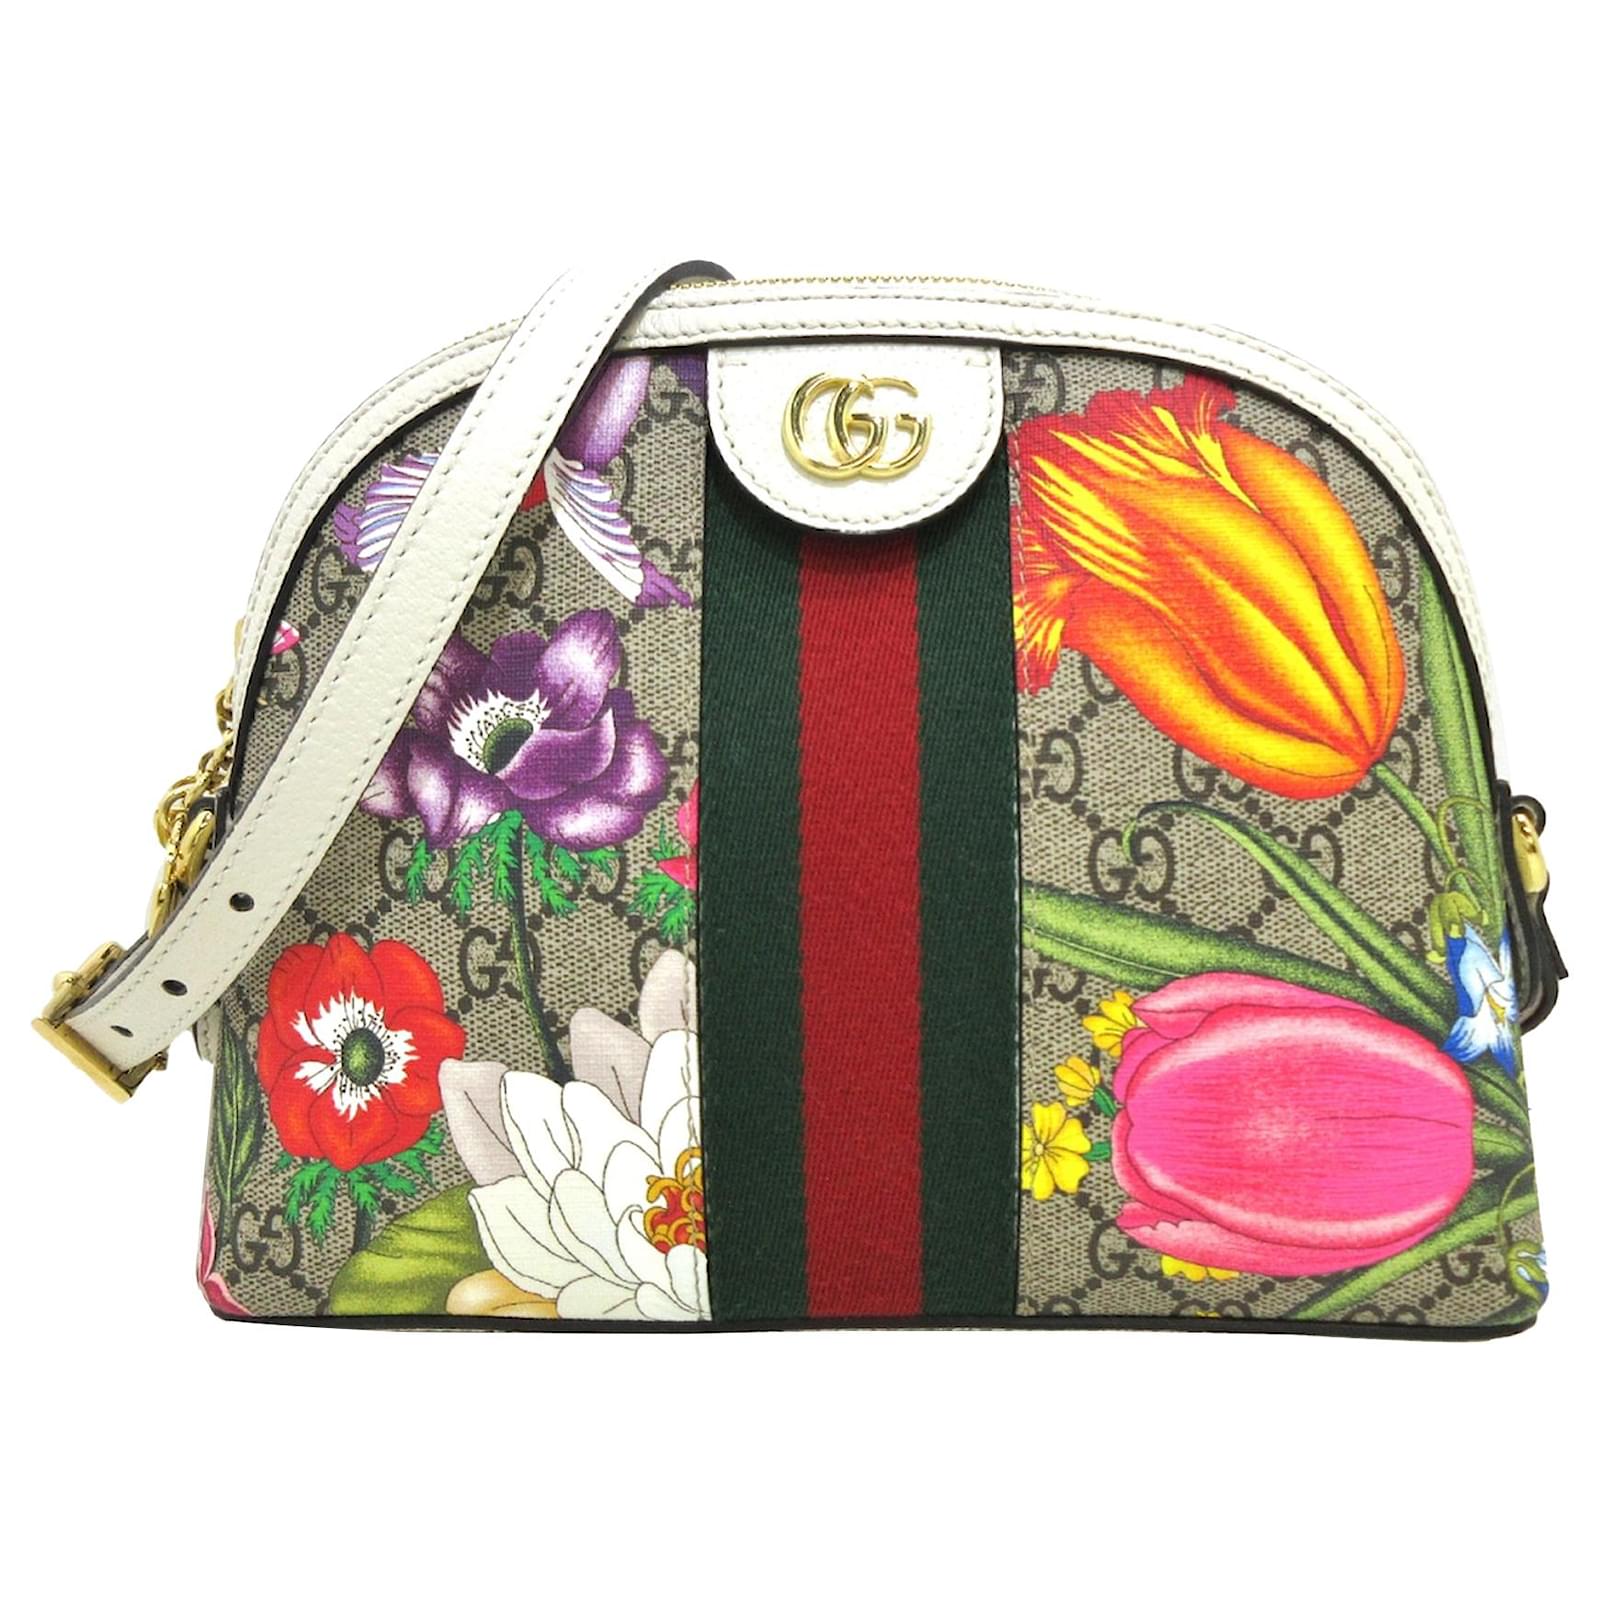 GUCCI Ophidia leather-trimmed printed coated-canvas shoulder bag